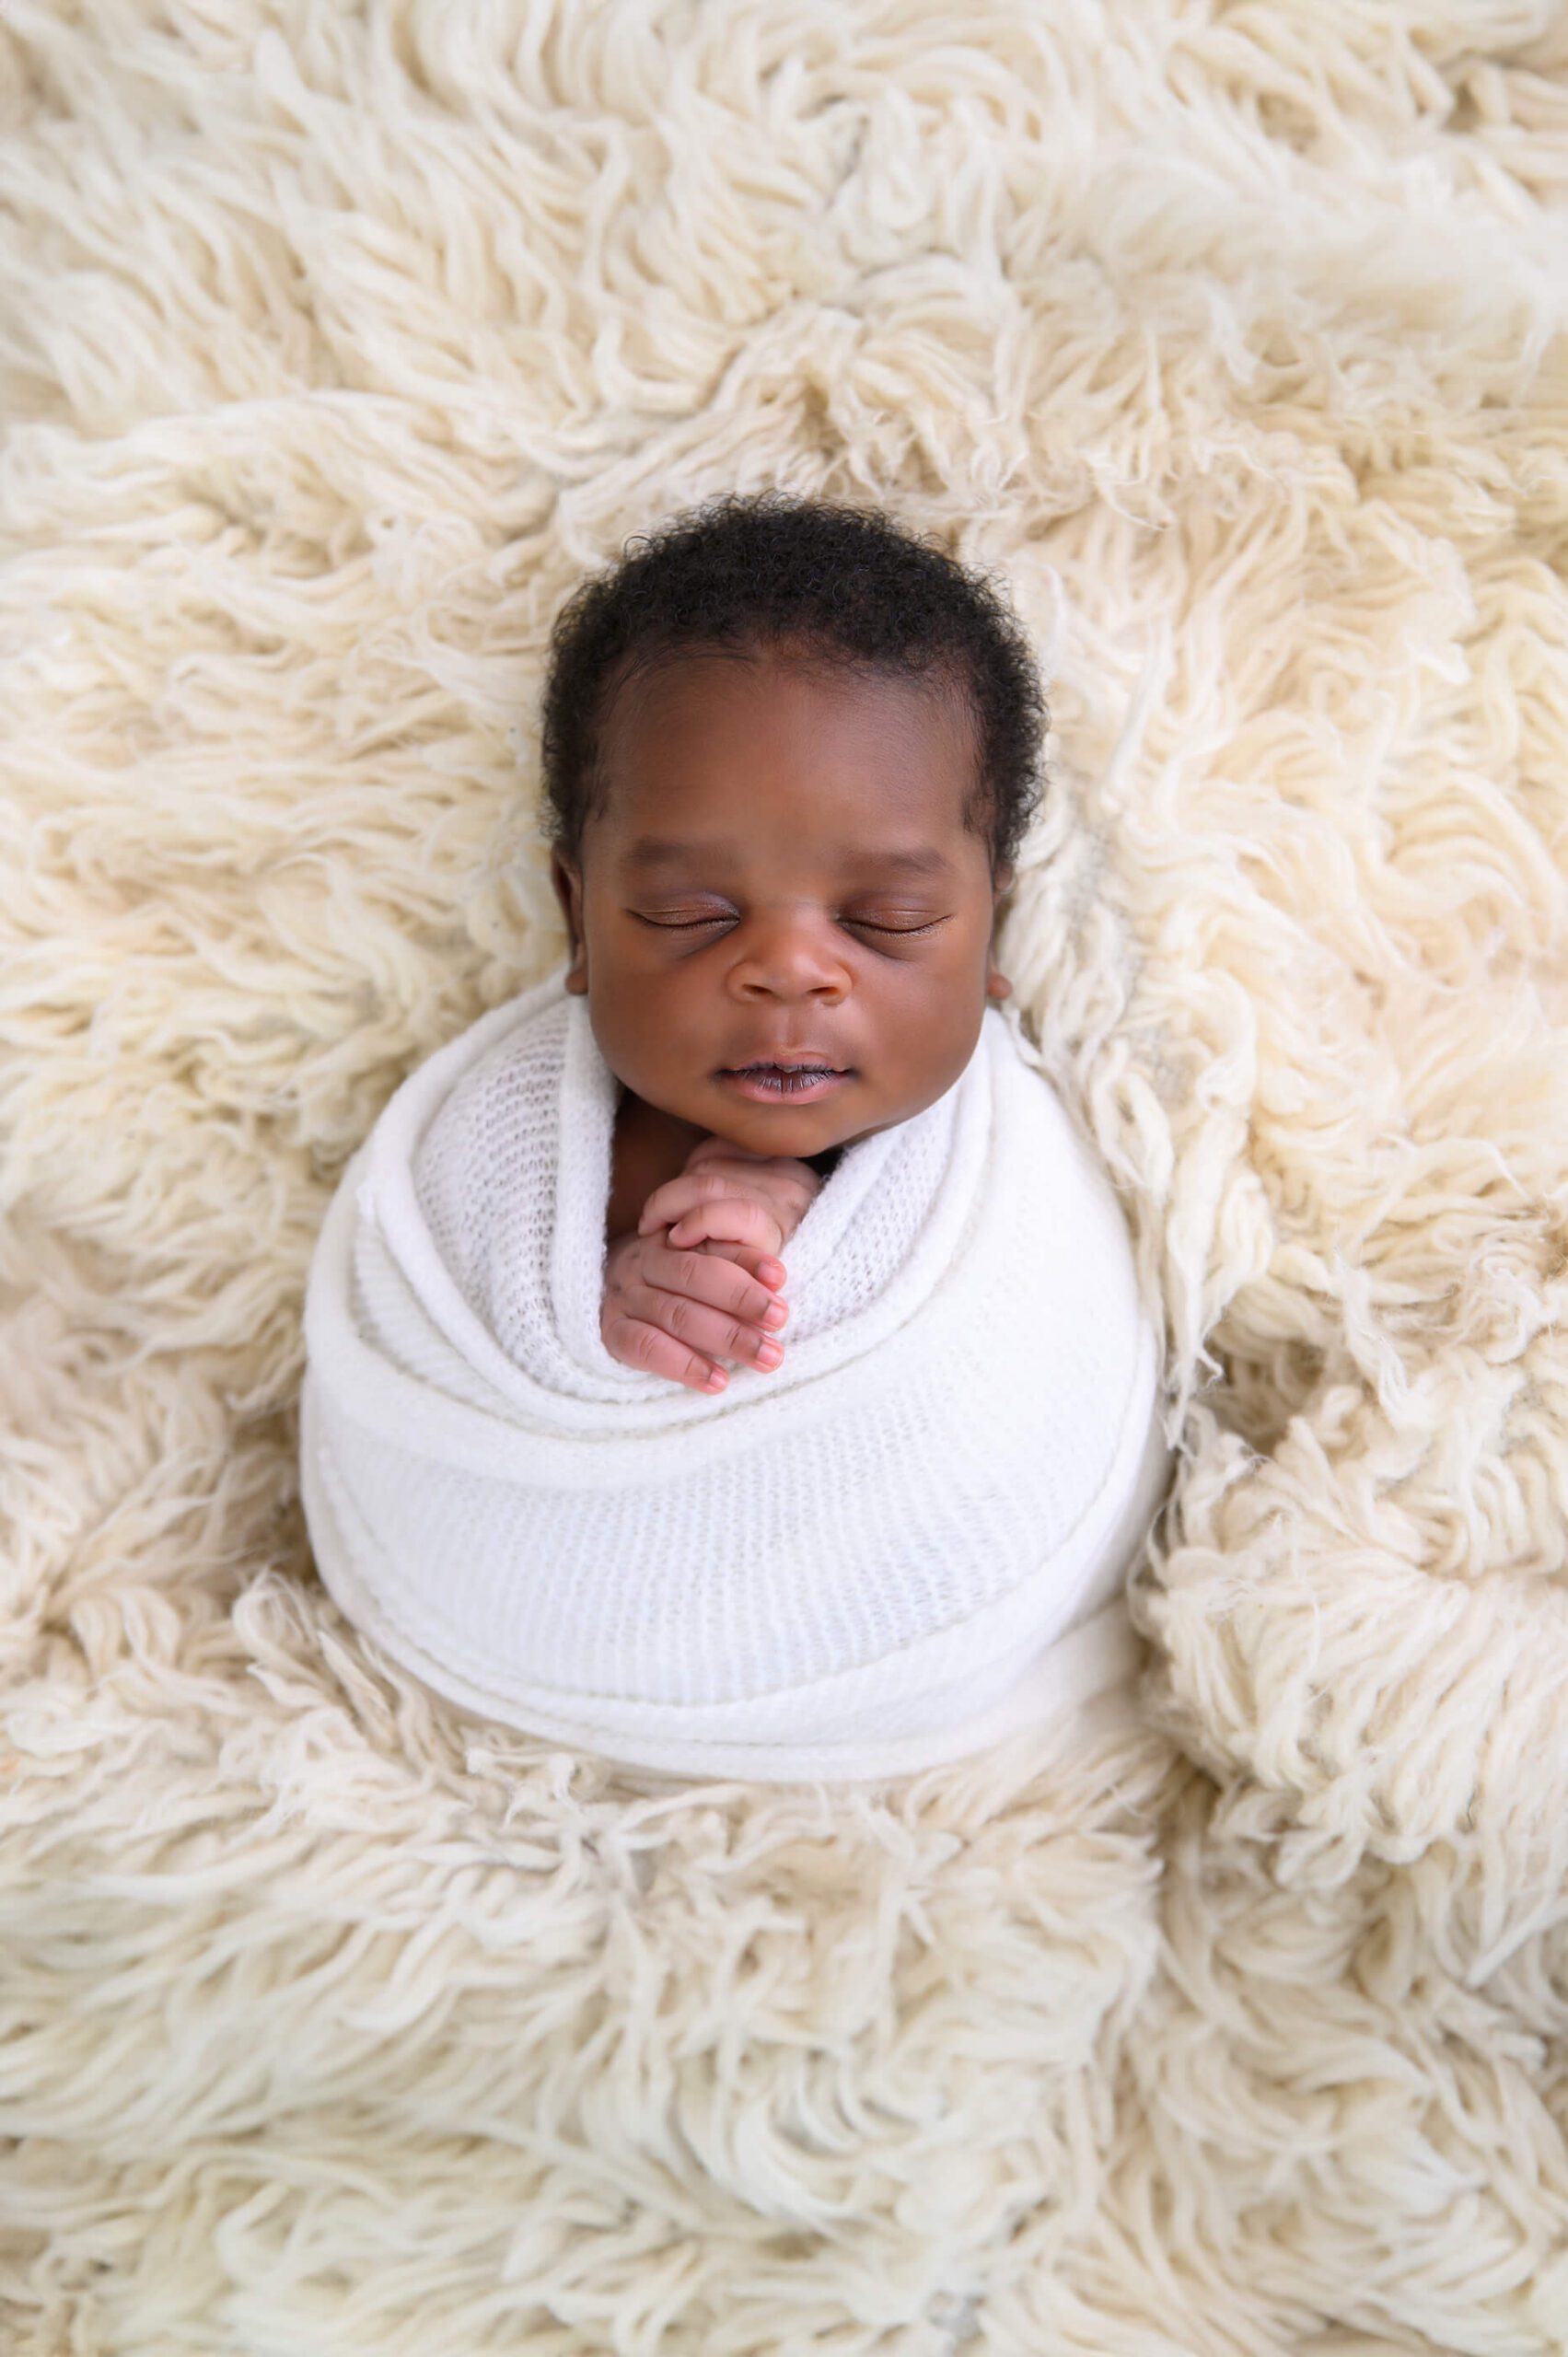 newborn photos of a little boy wrapped in white on a cream rug